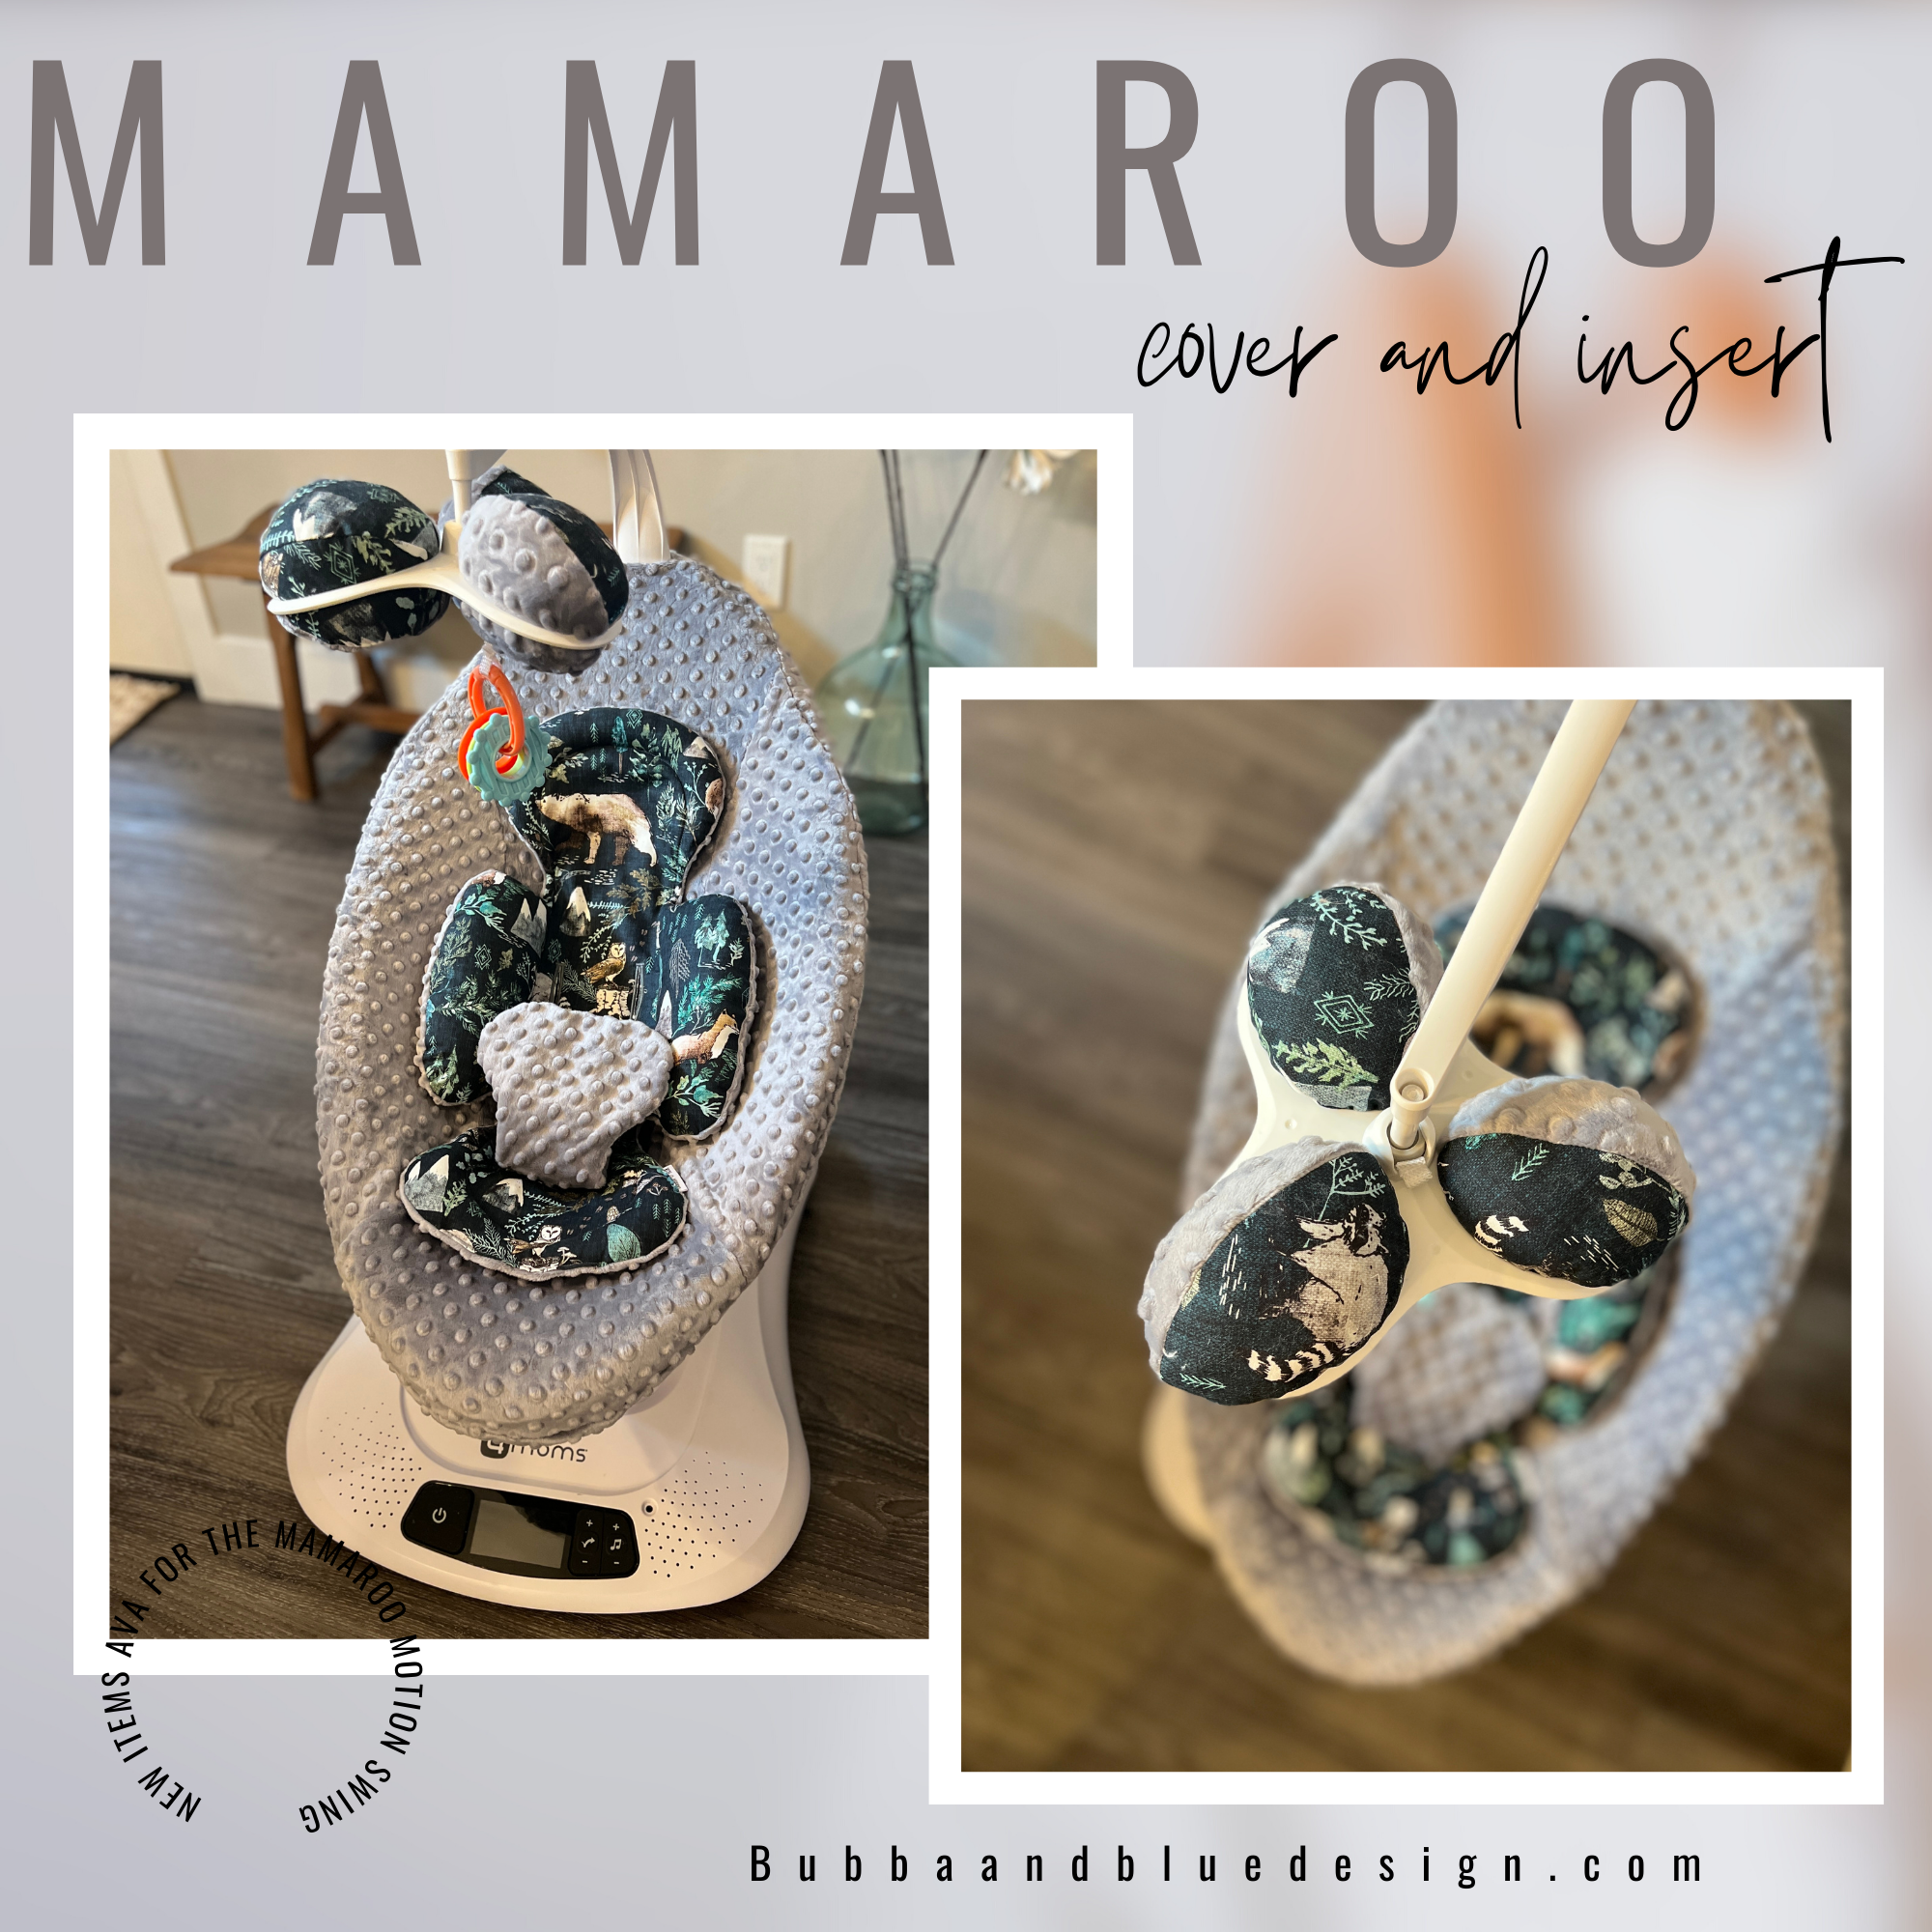 Mamaroo seat cover and newborn insert in dark fable forest